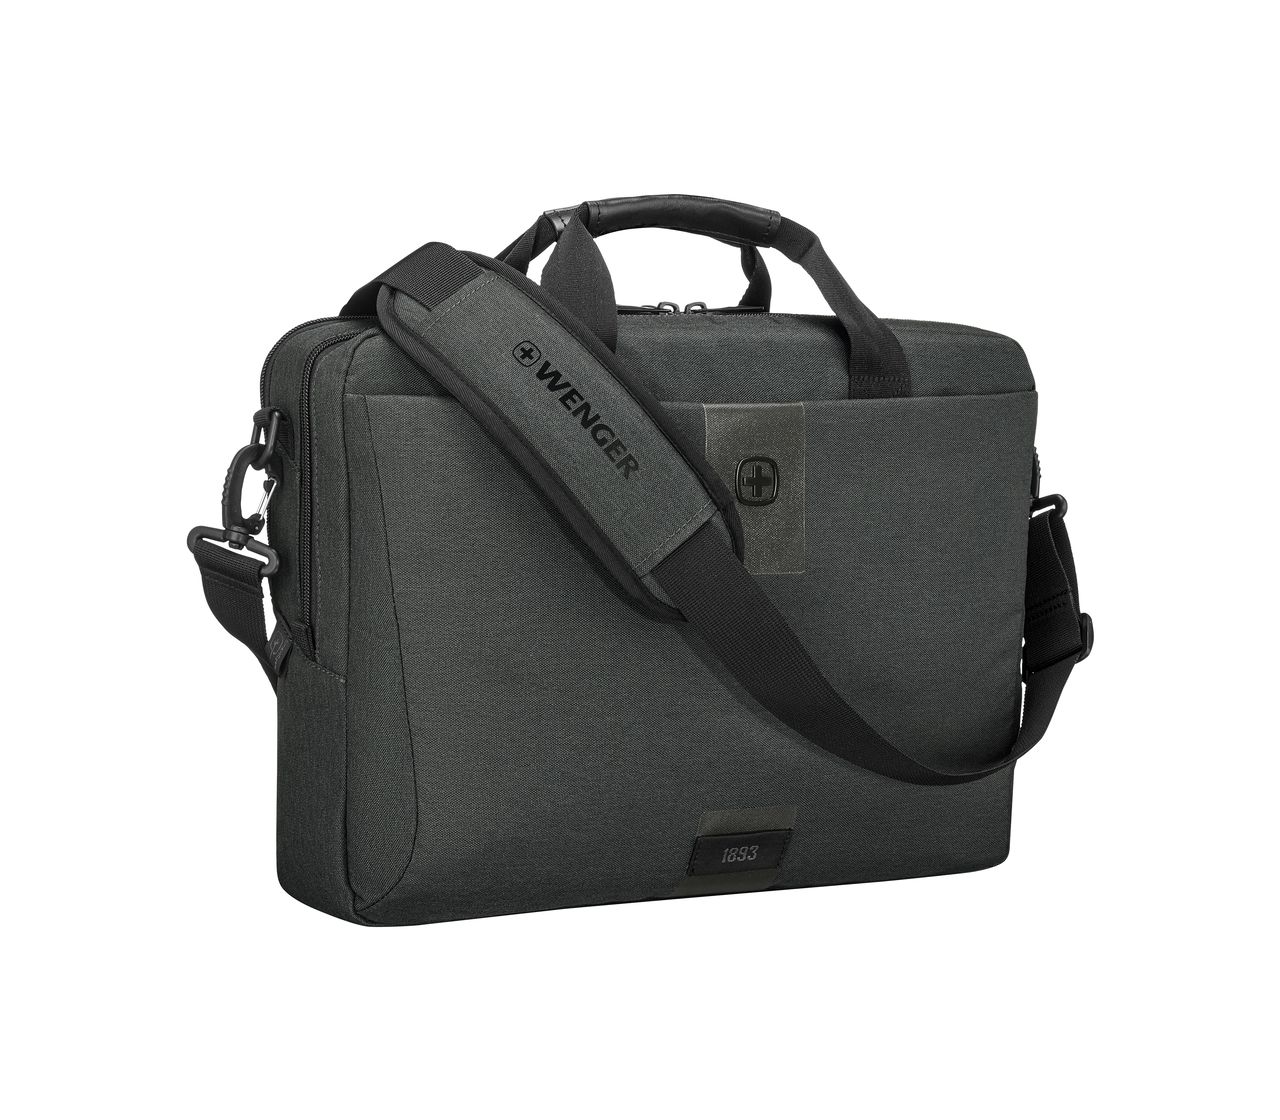 Wenger MX ECO Brief in Charcoal - 612263